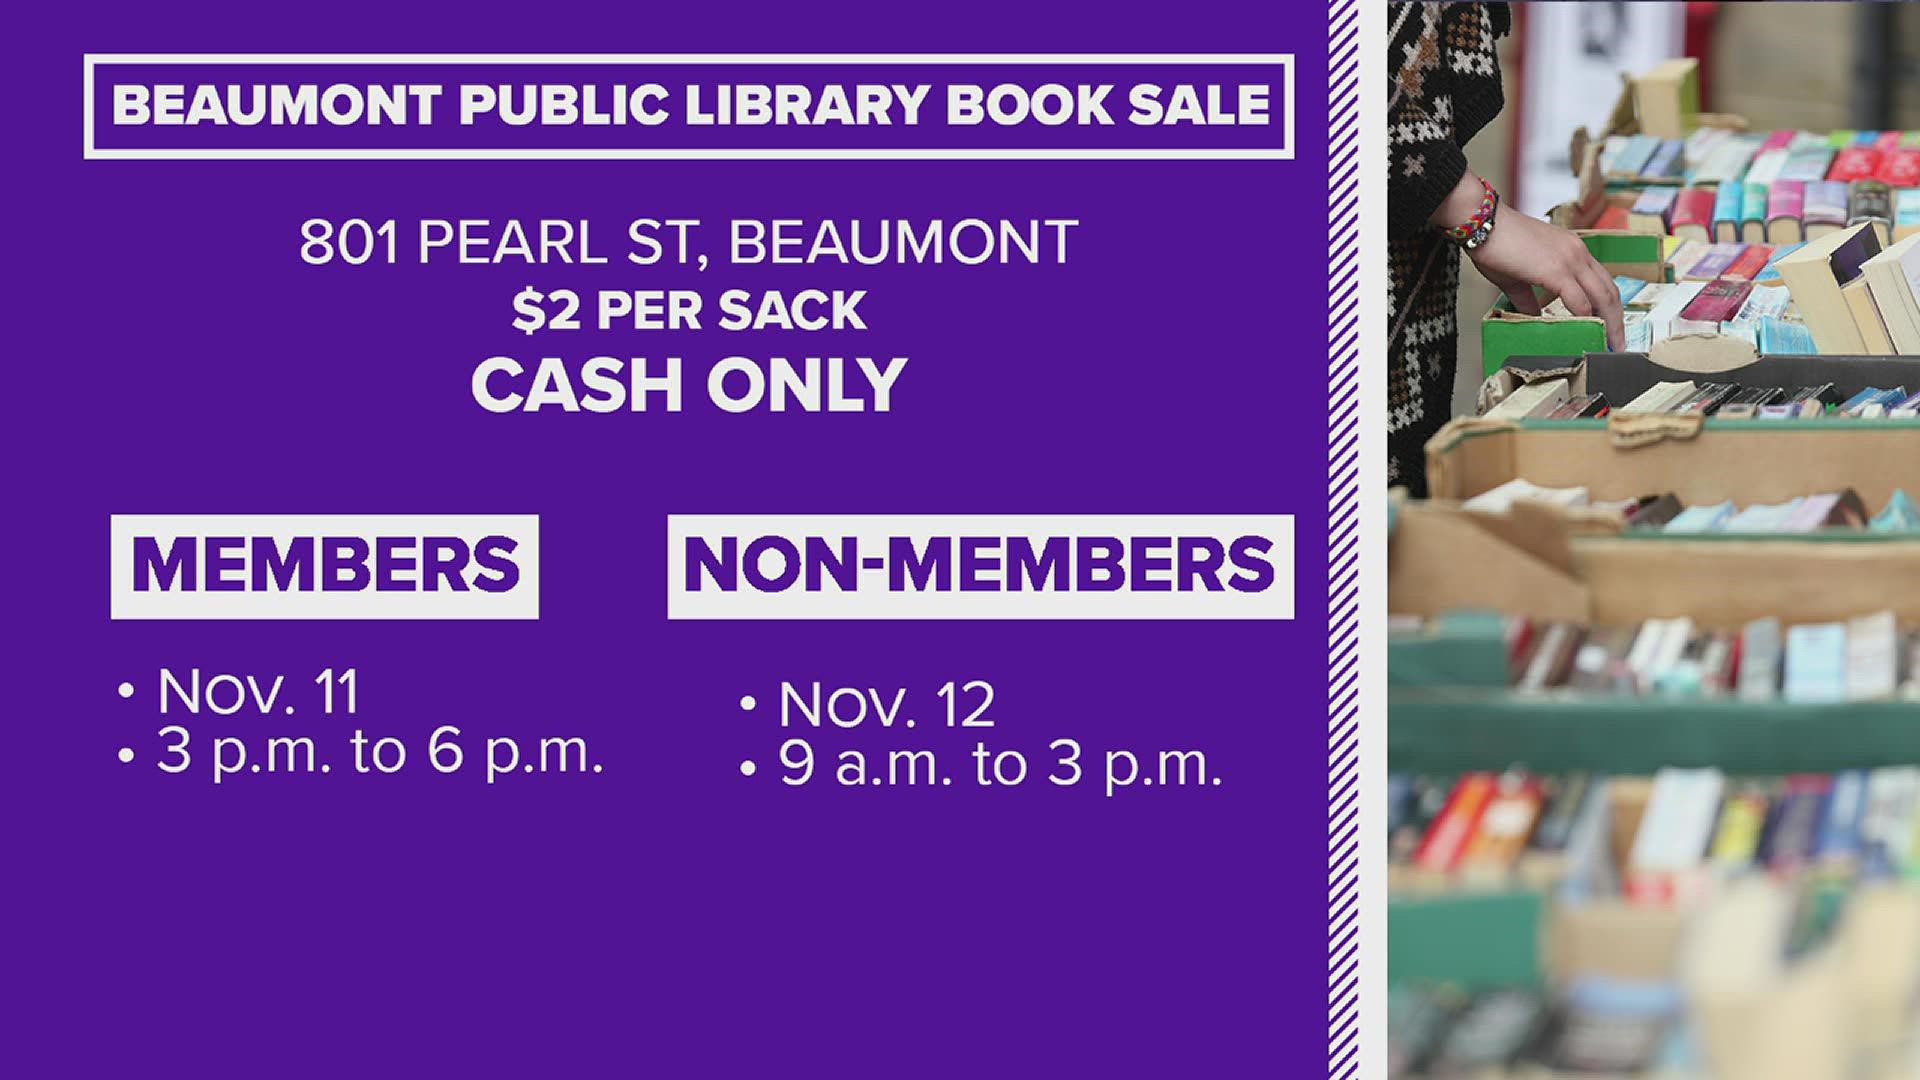 The basement sale will feature novels, non-fiction, history, biographies, cookbooks, craft books and more.